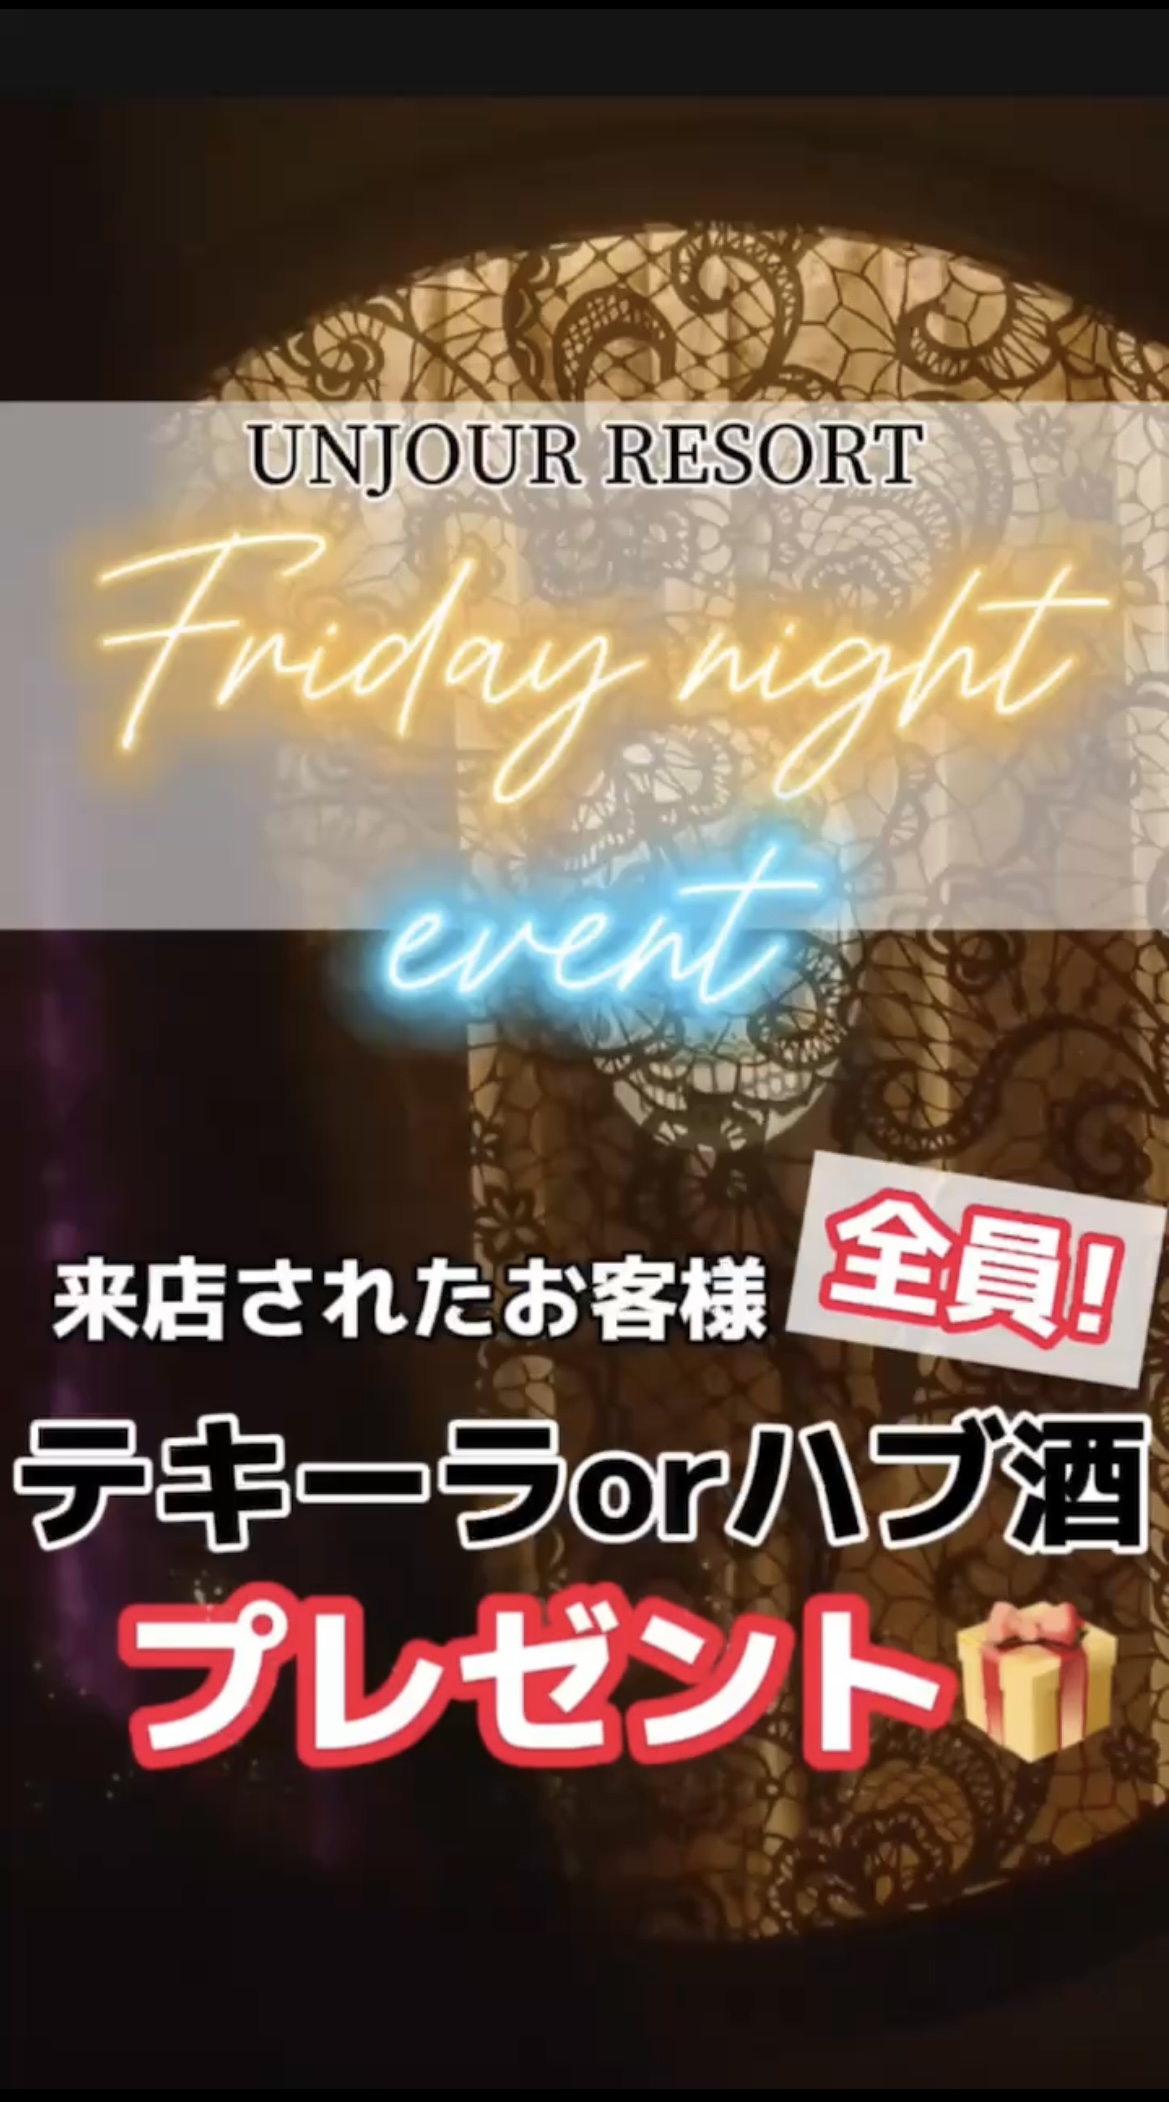 EVENT-FRIDAY NIGHT（UNJOURリゾート）